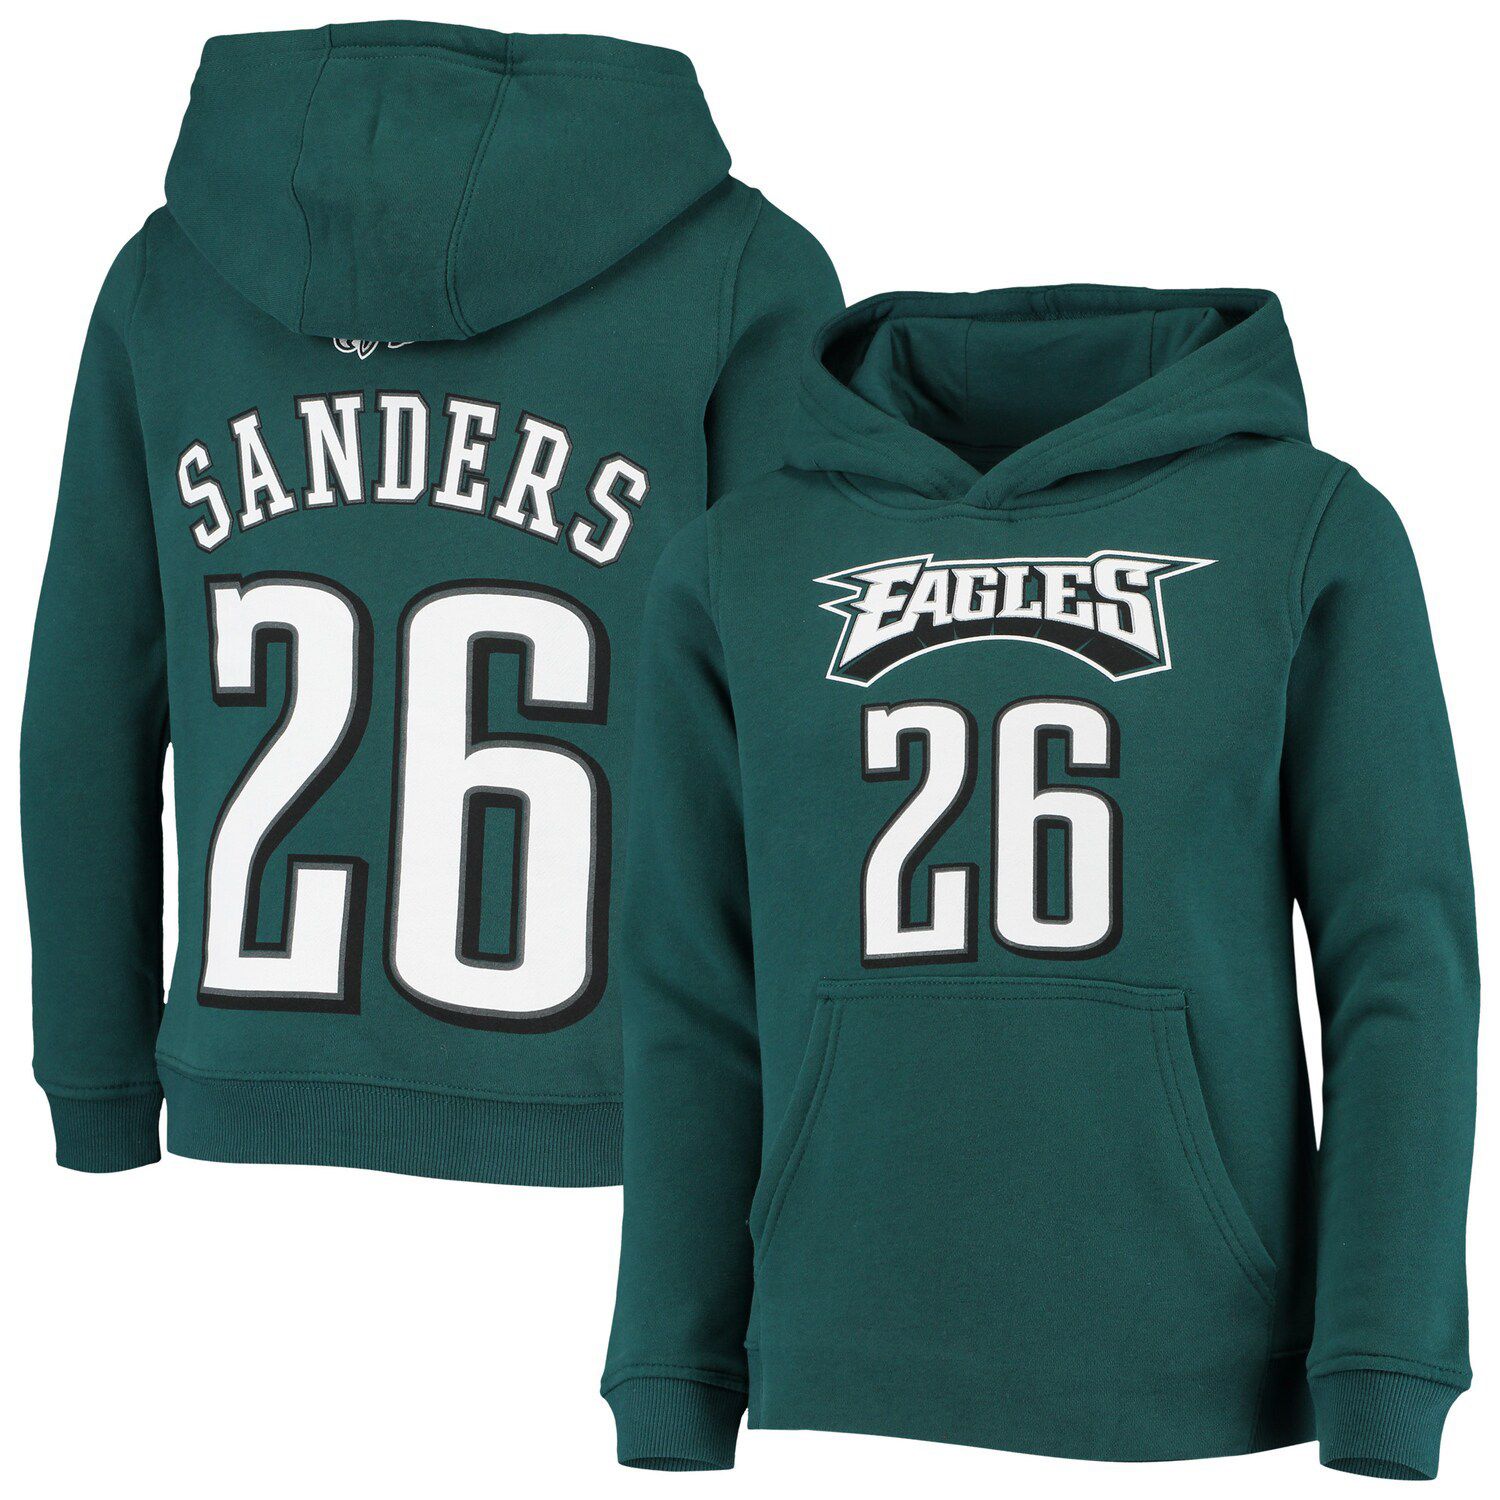 miles sanders jersey youth